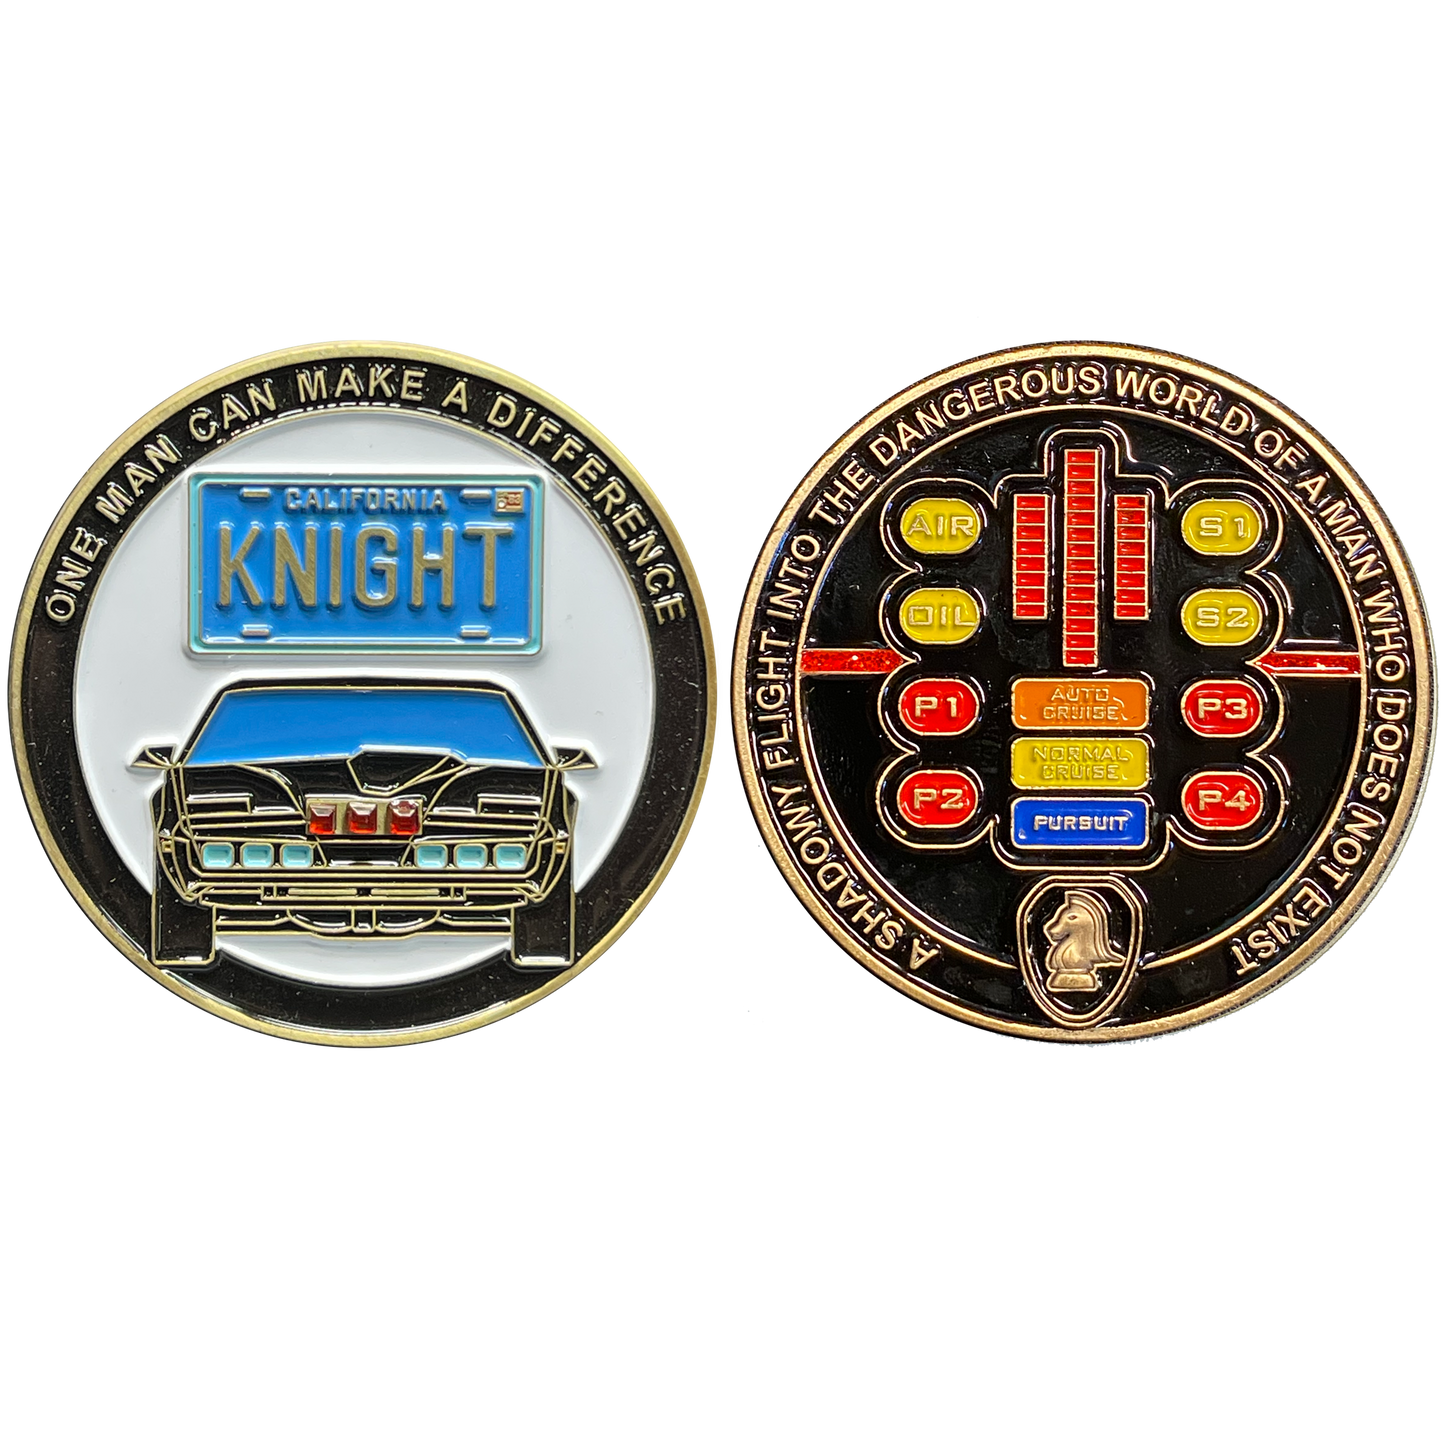 Discontinued BL8-003 KNIGHT RIDER KITT white variant Challenge Coin Limited Edition of 87